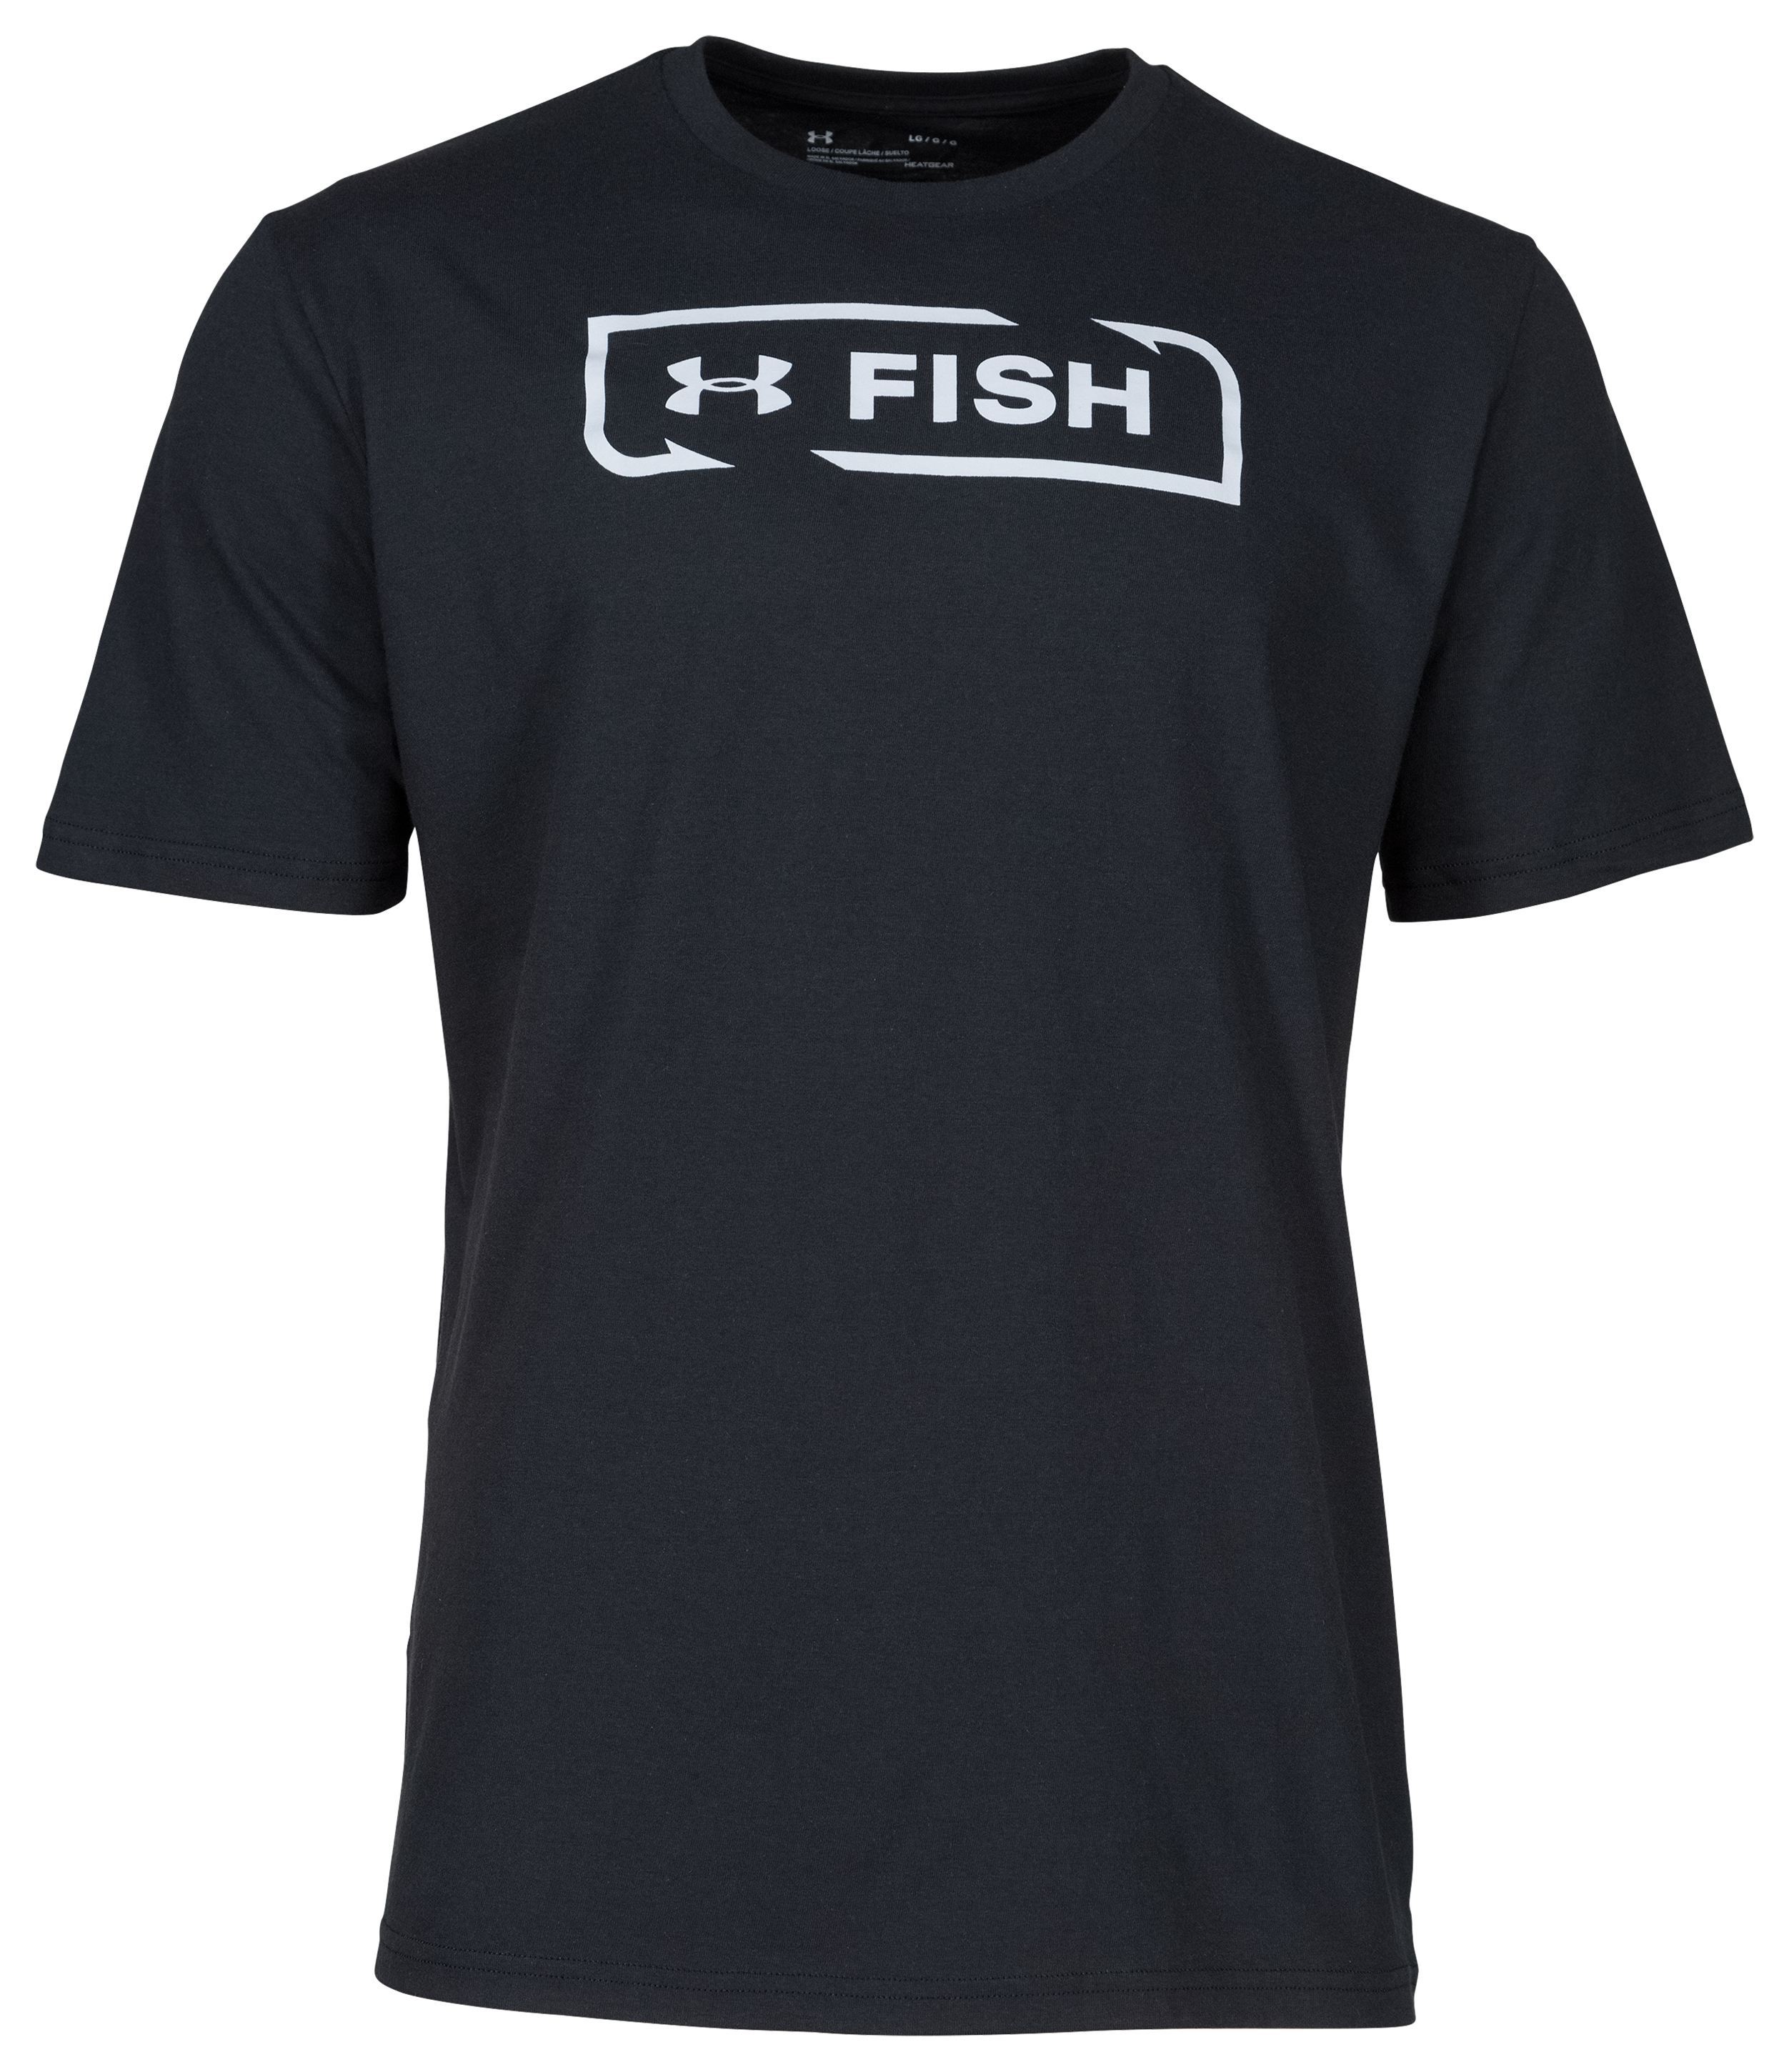 NEW UNDER ARMOUR FISHING SHIRTS for Sale in Spring, TX